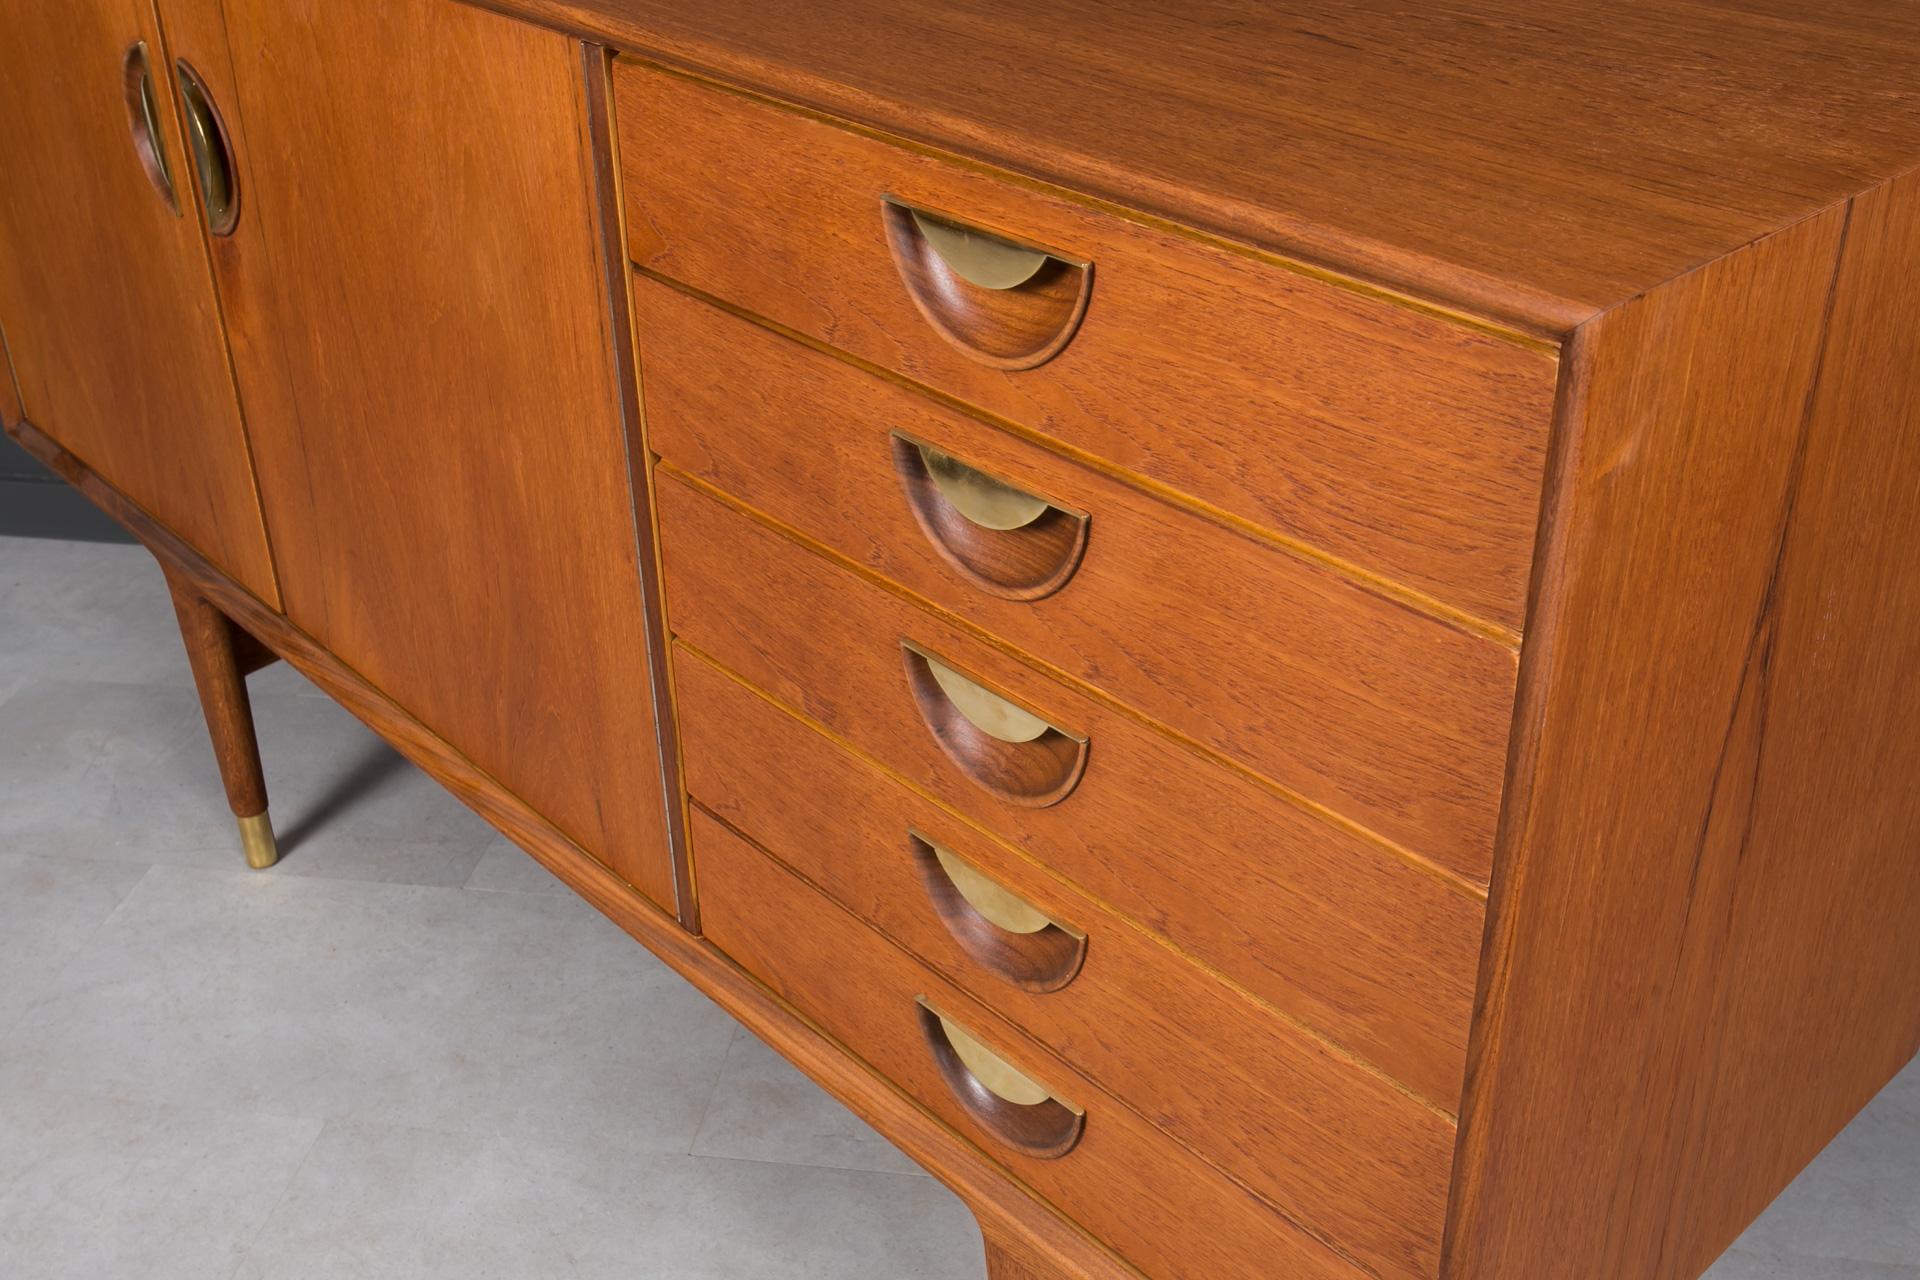 Midcentury Danish Sideboard, Teak Wood and Brass Details, 1950s For Sale 2